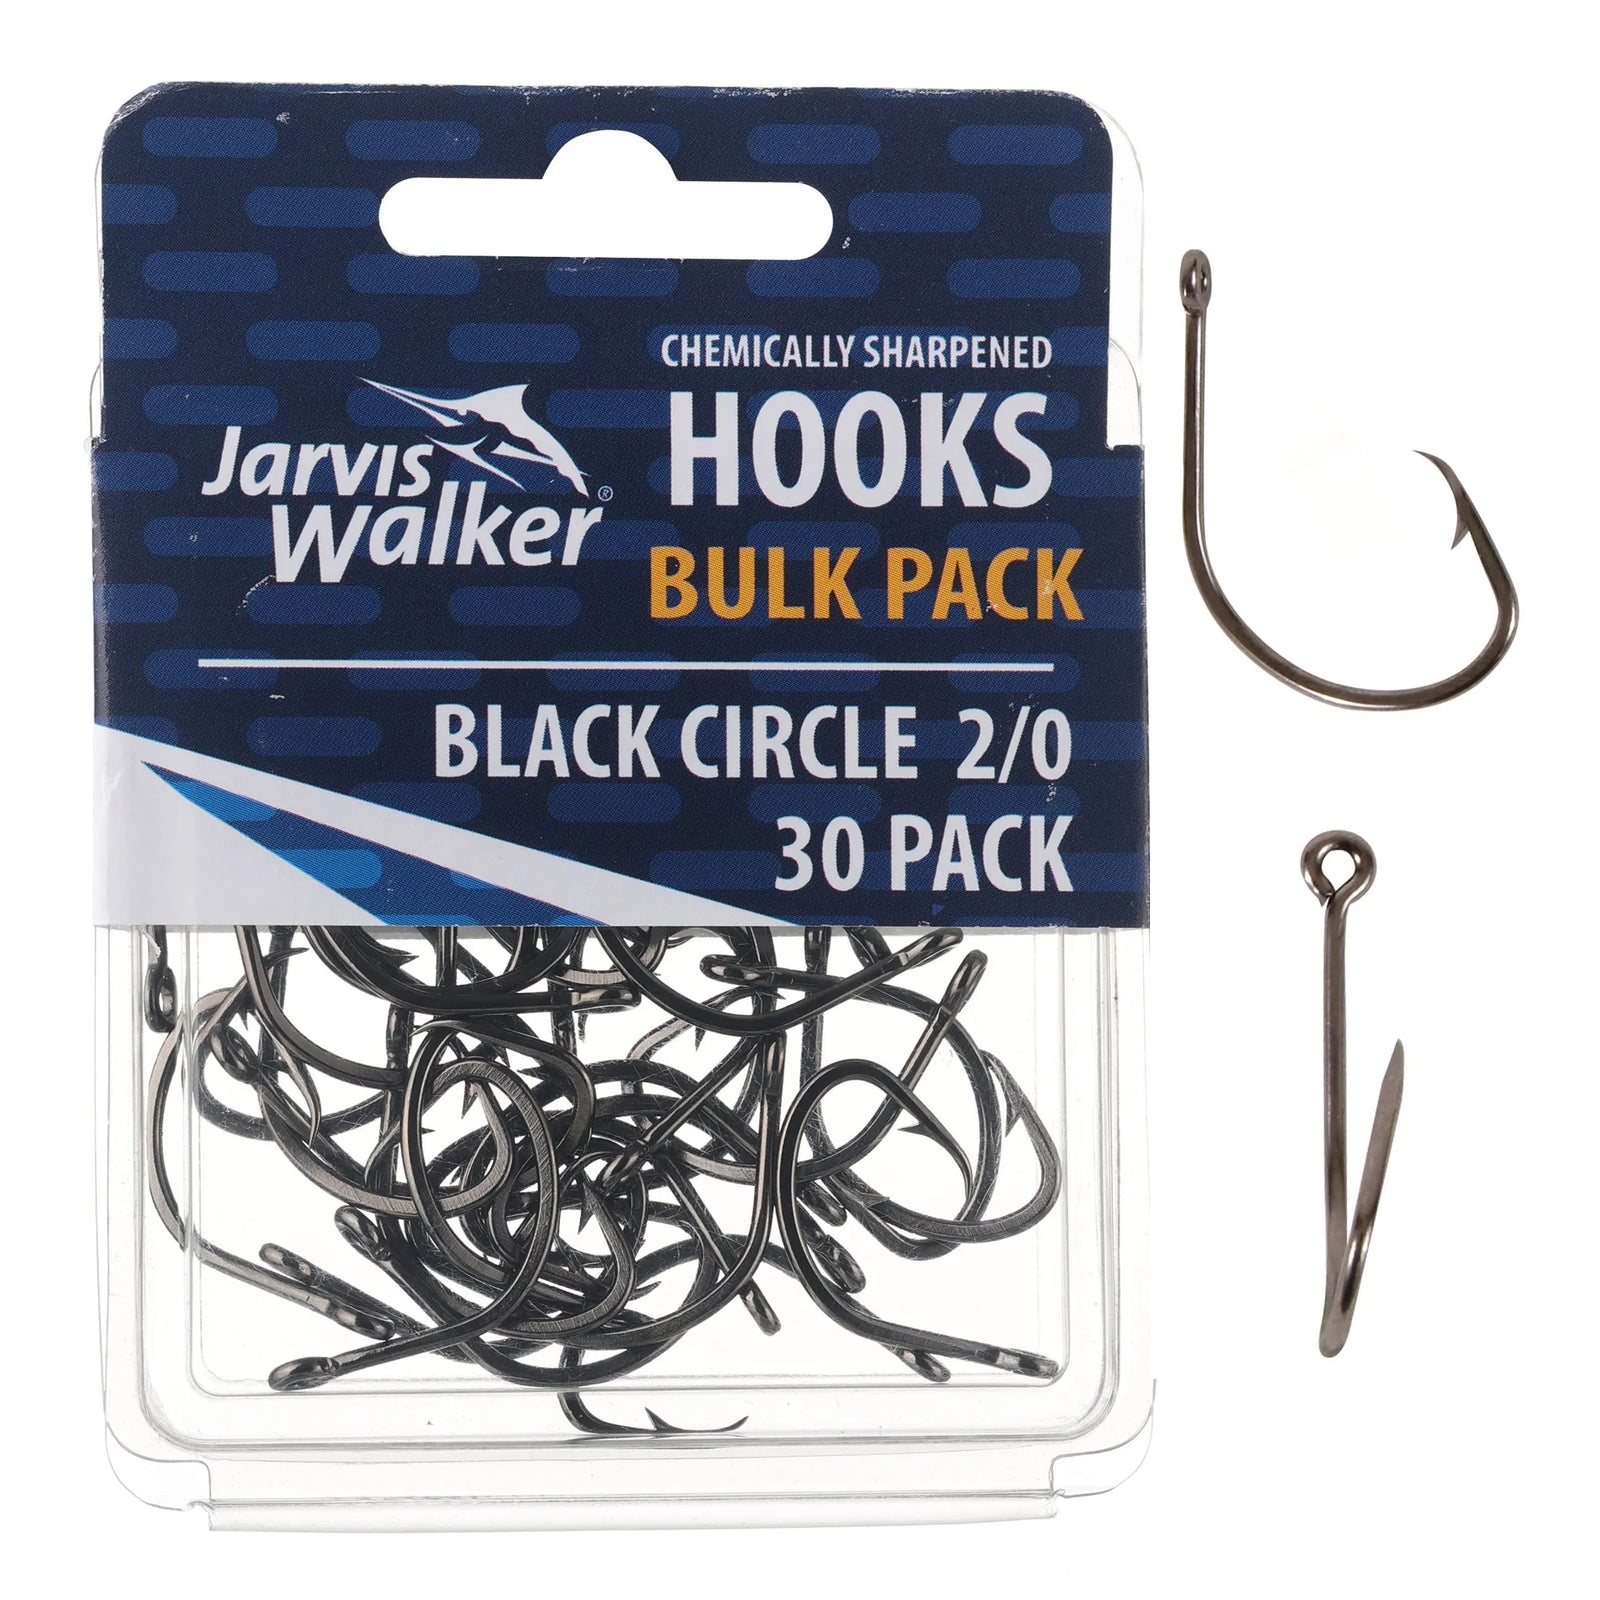 Shop Jarvis Walker Fishing Clothing and Accessories